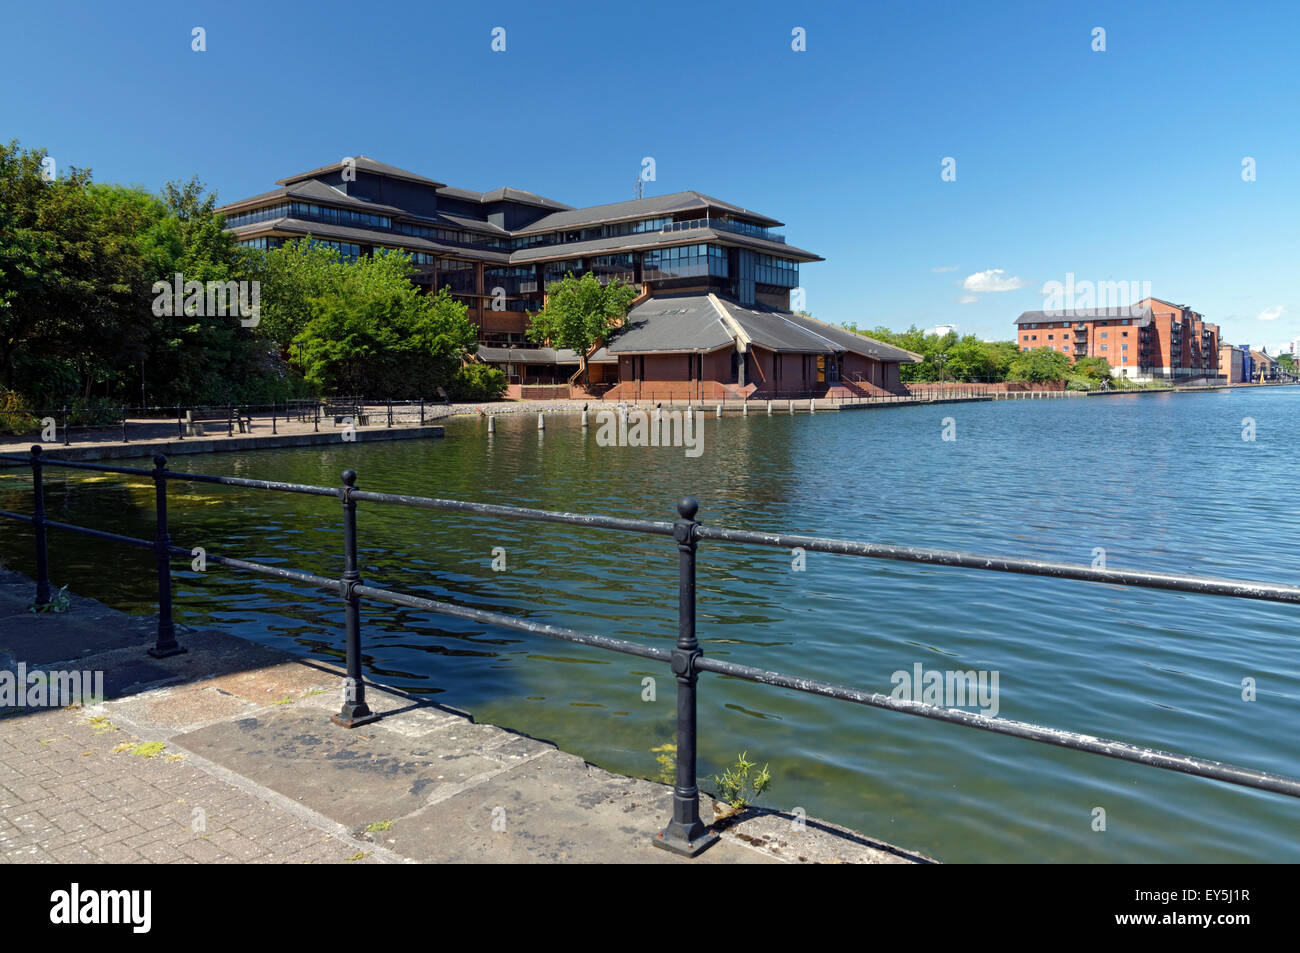 Cardiff County Council Hall, Atlantic Wharf, Cardiff, Pays de Galles, Royaume-Uni. Banque D'Images